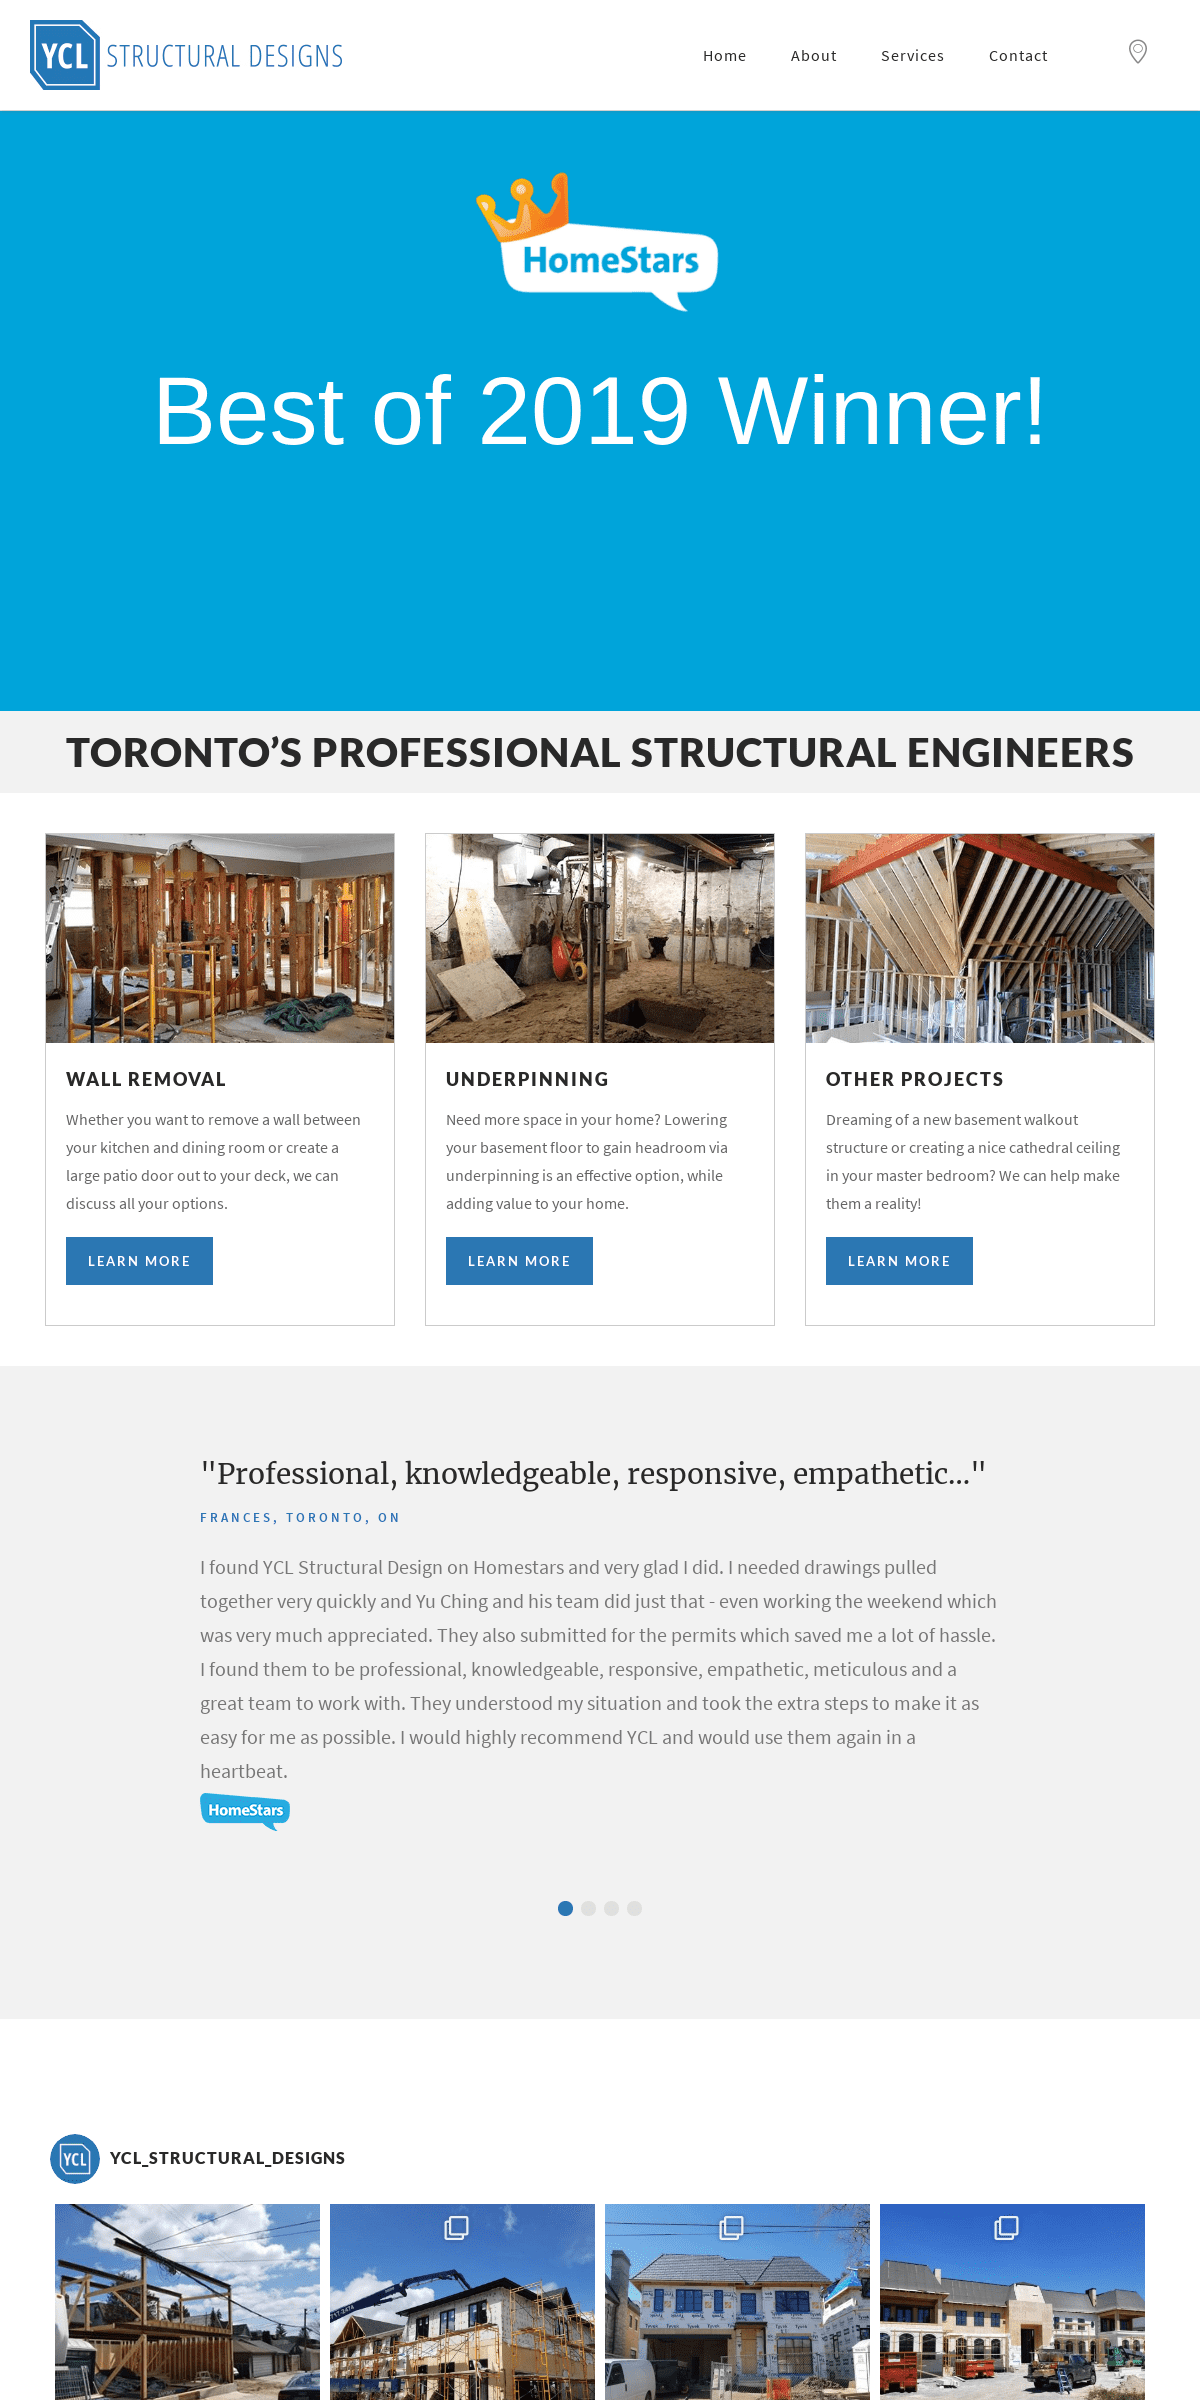 A complete backup of yclstructuraldesigns.ca